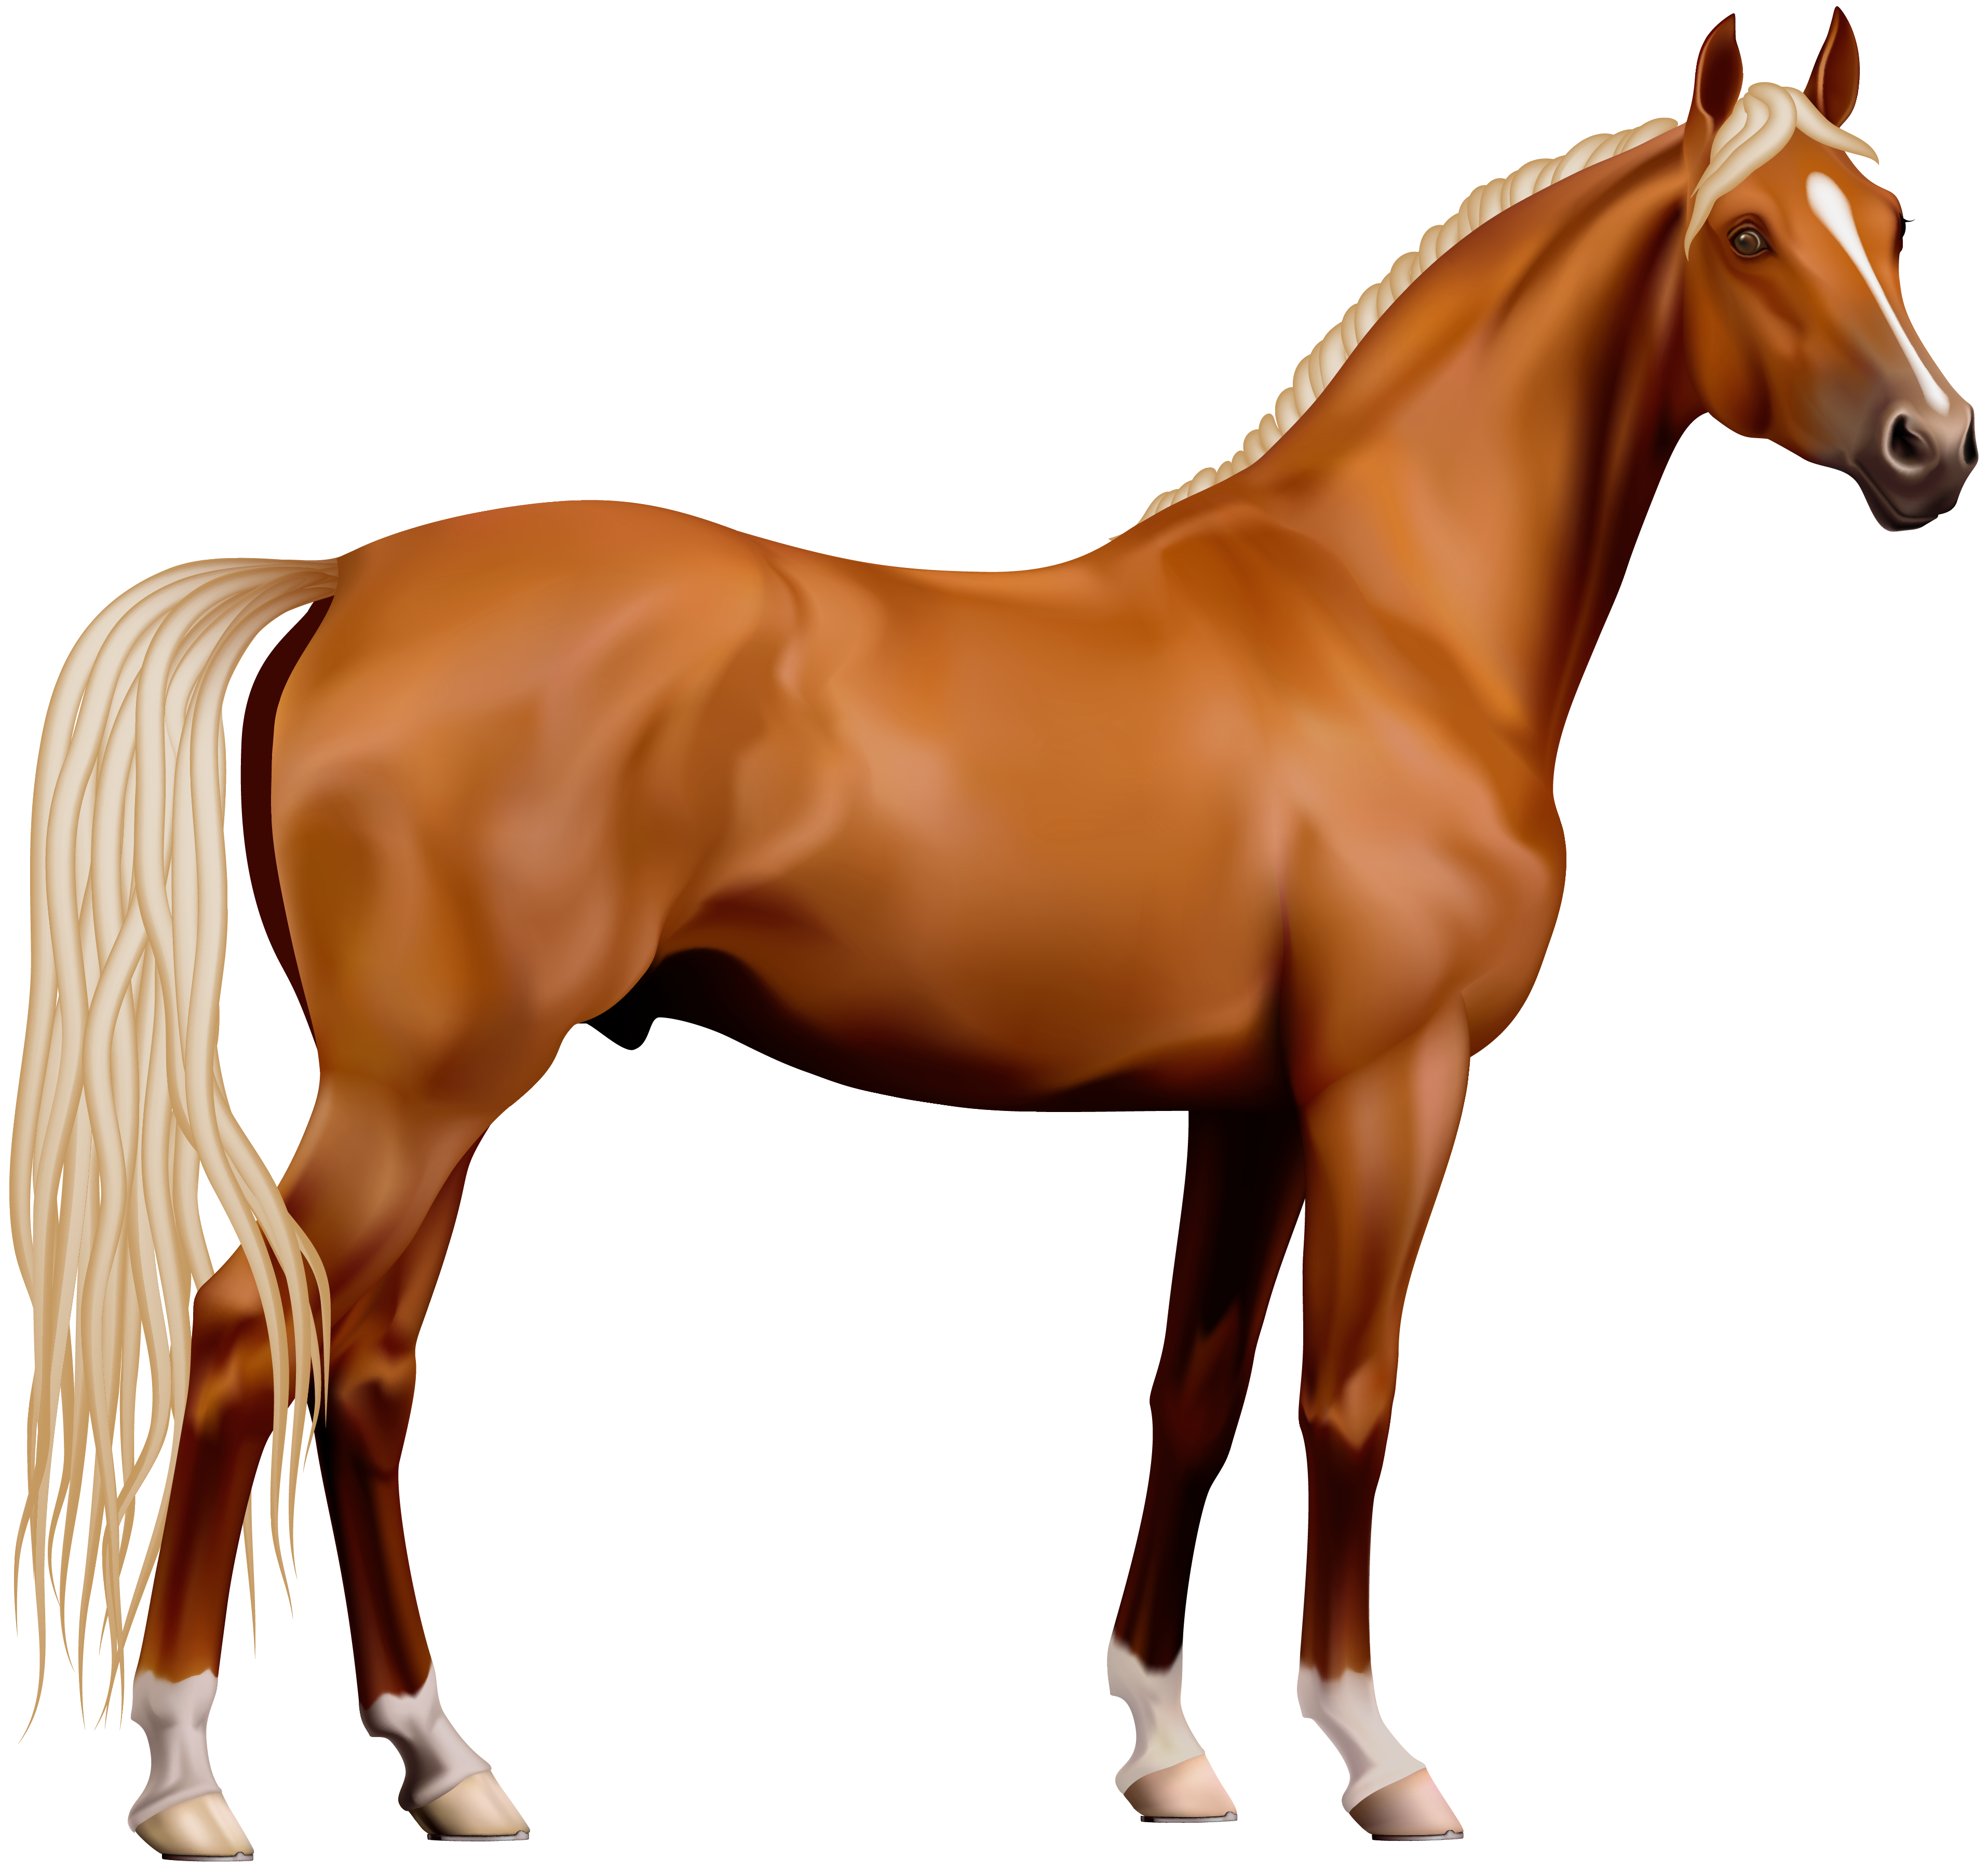 clipart image of a horse - photo #33